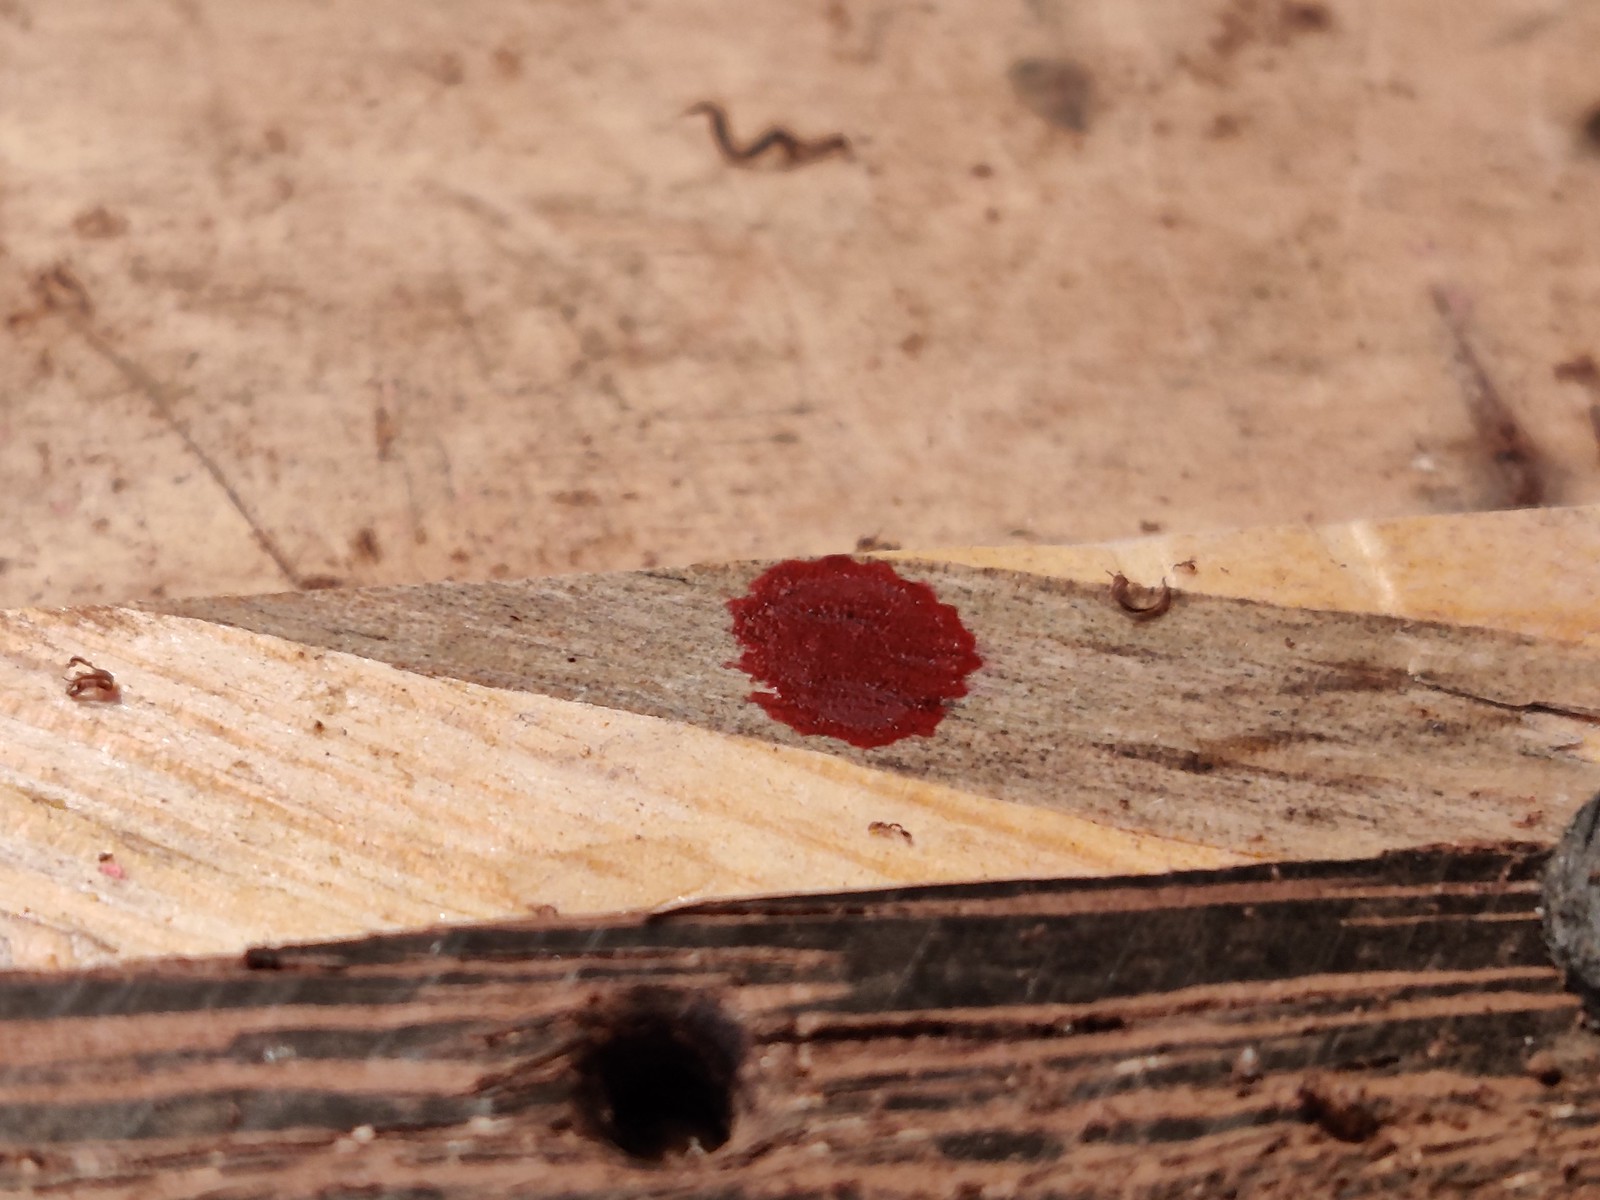 A small drop of blood on a wood piece